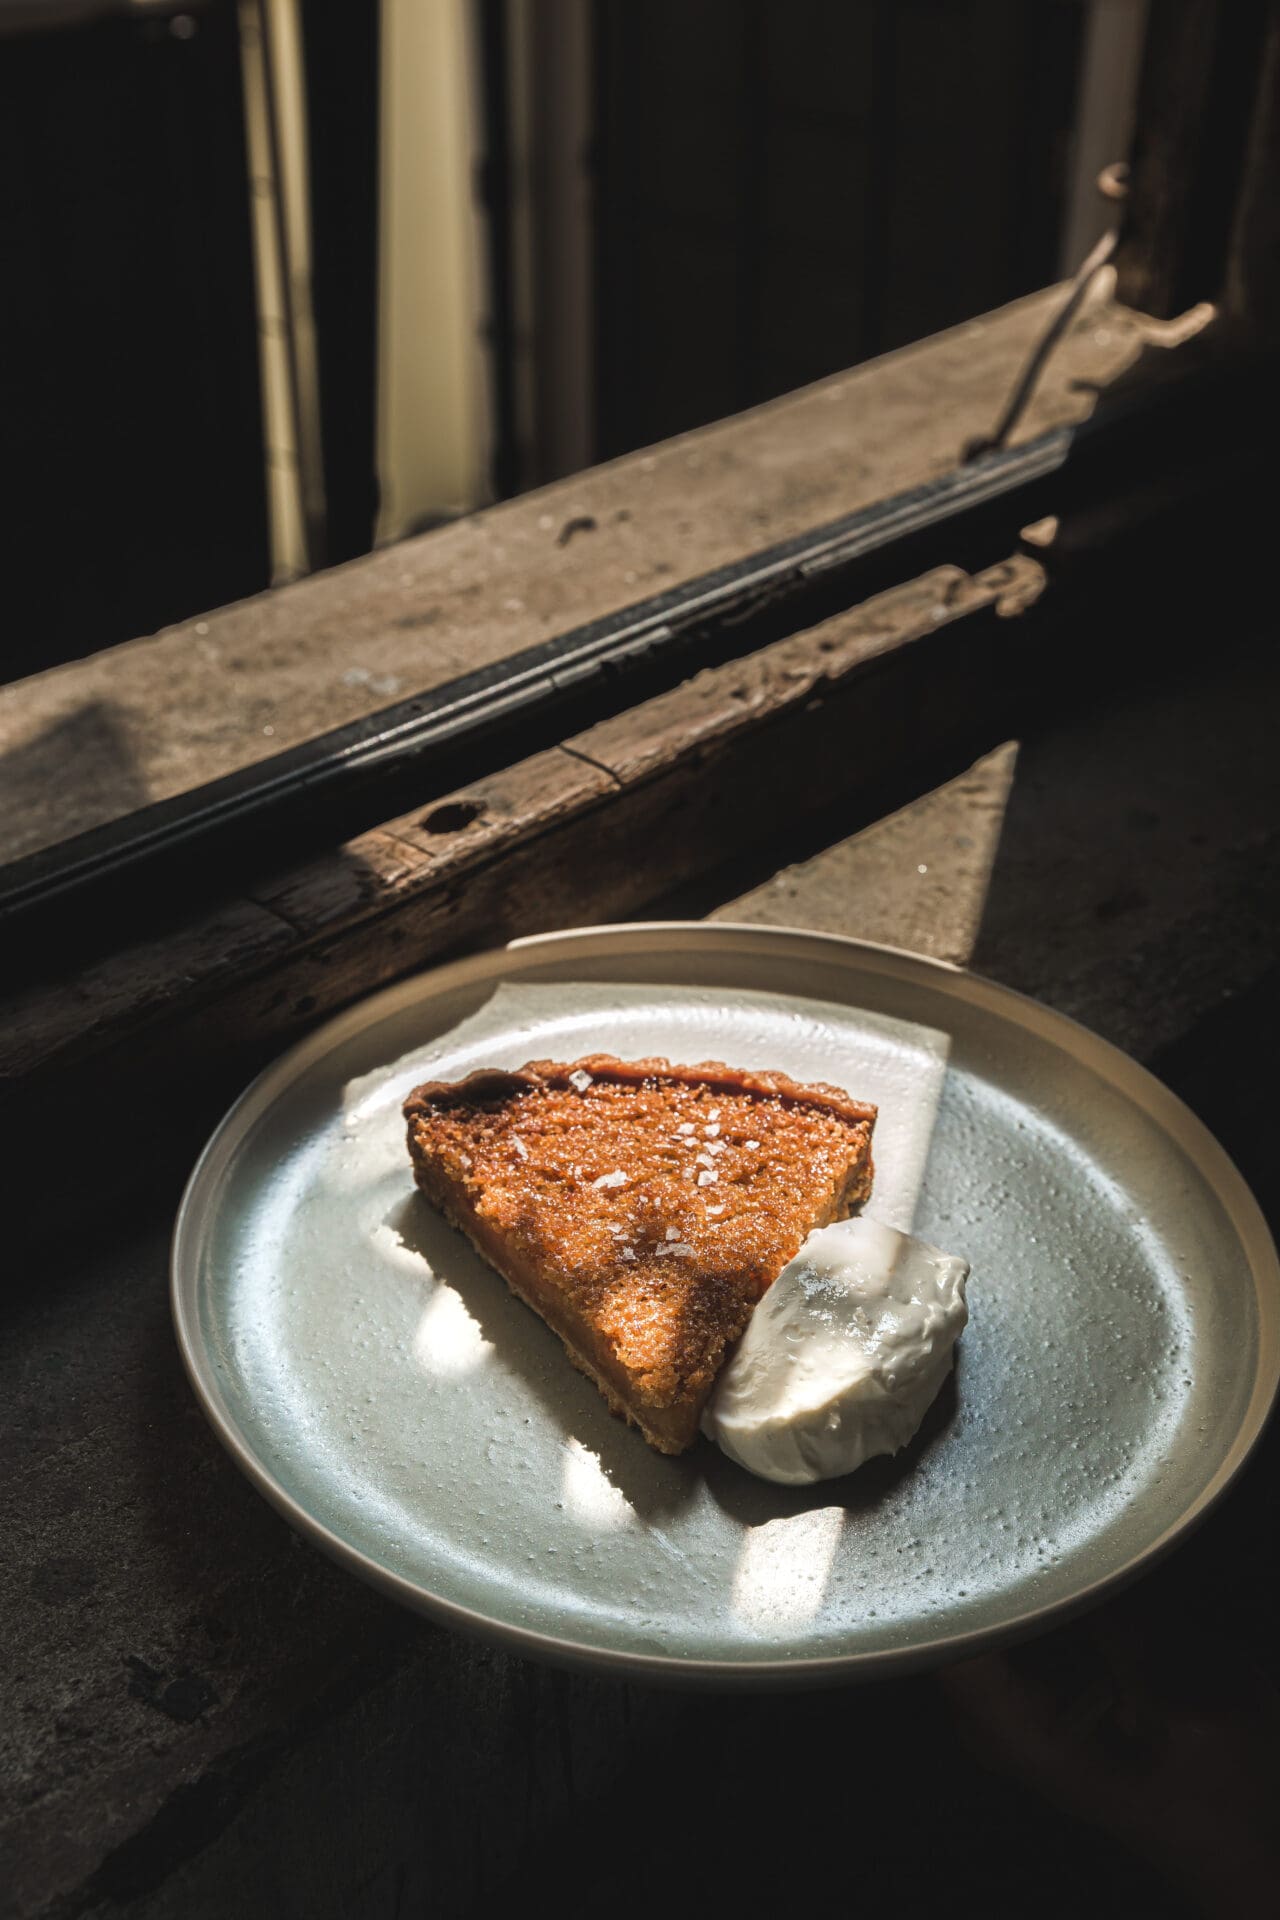 Best Bangkok coffee shops | A slice of treacle tart served with a scoop of cream sits on a window sill, with light spilling across it